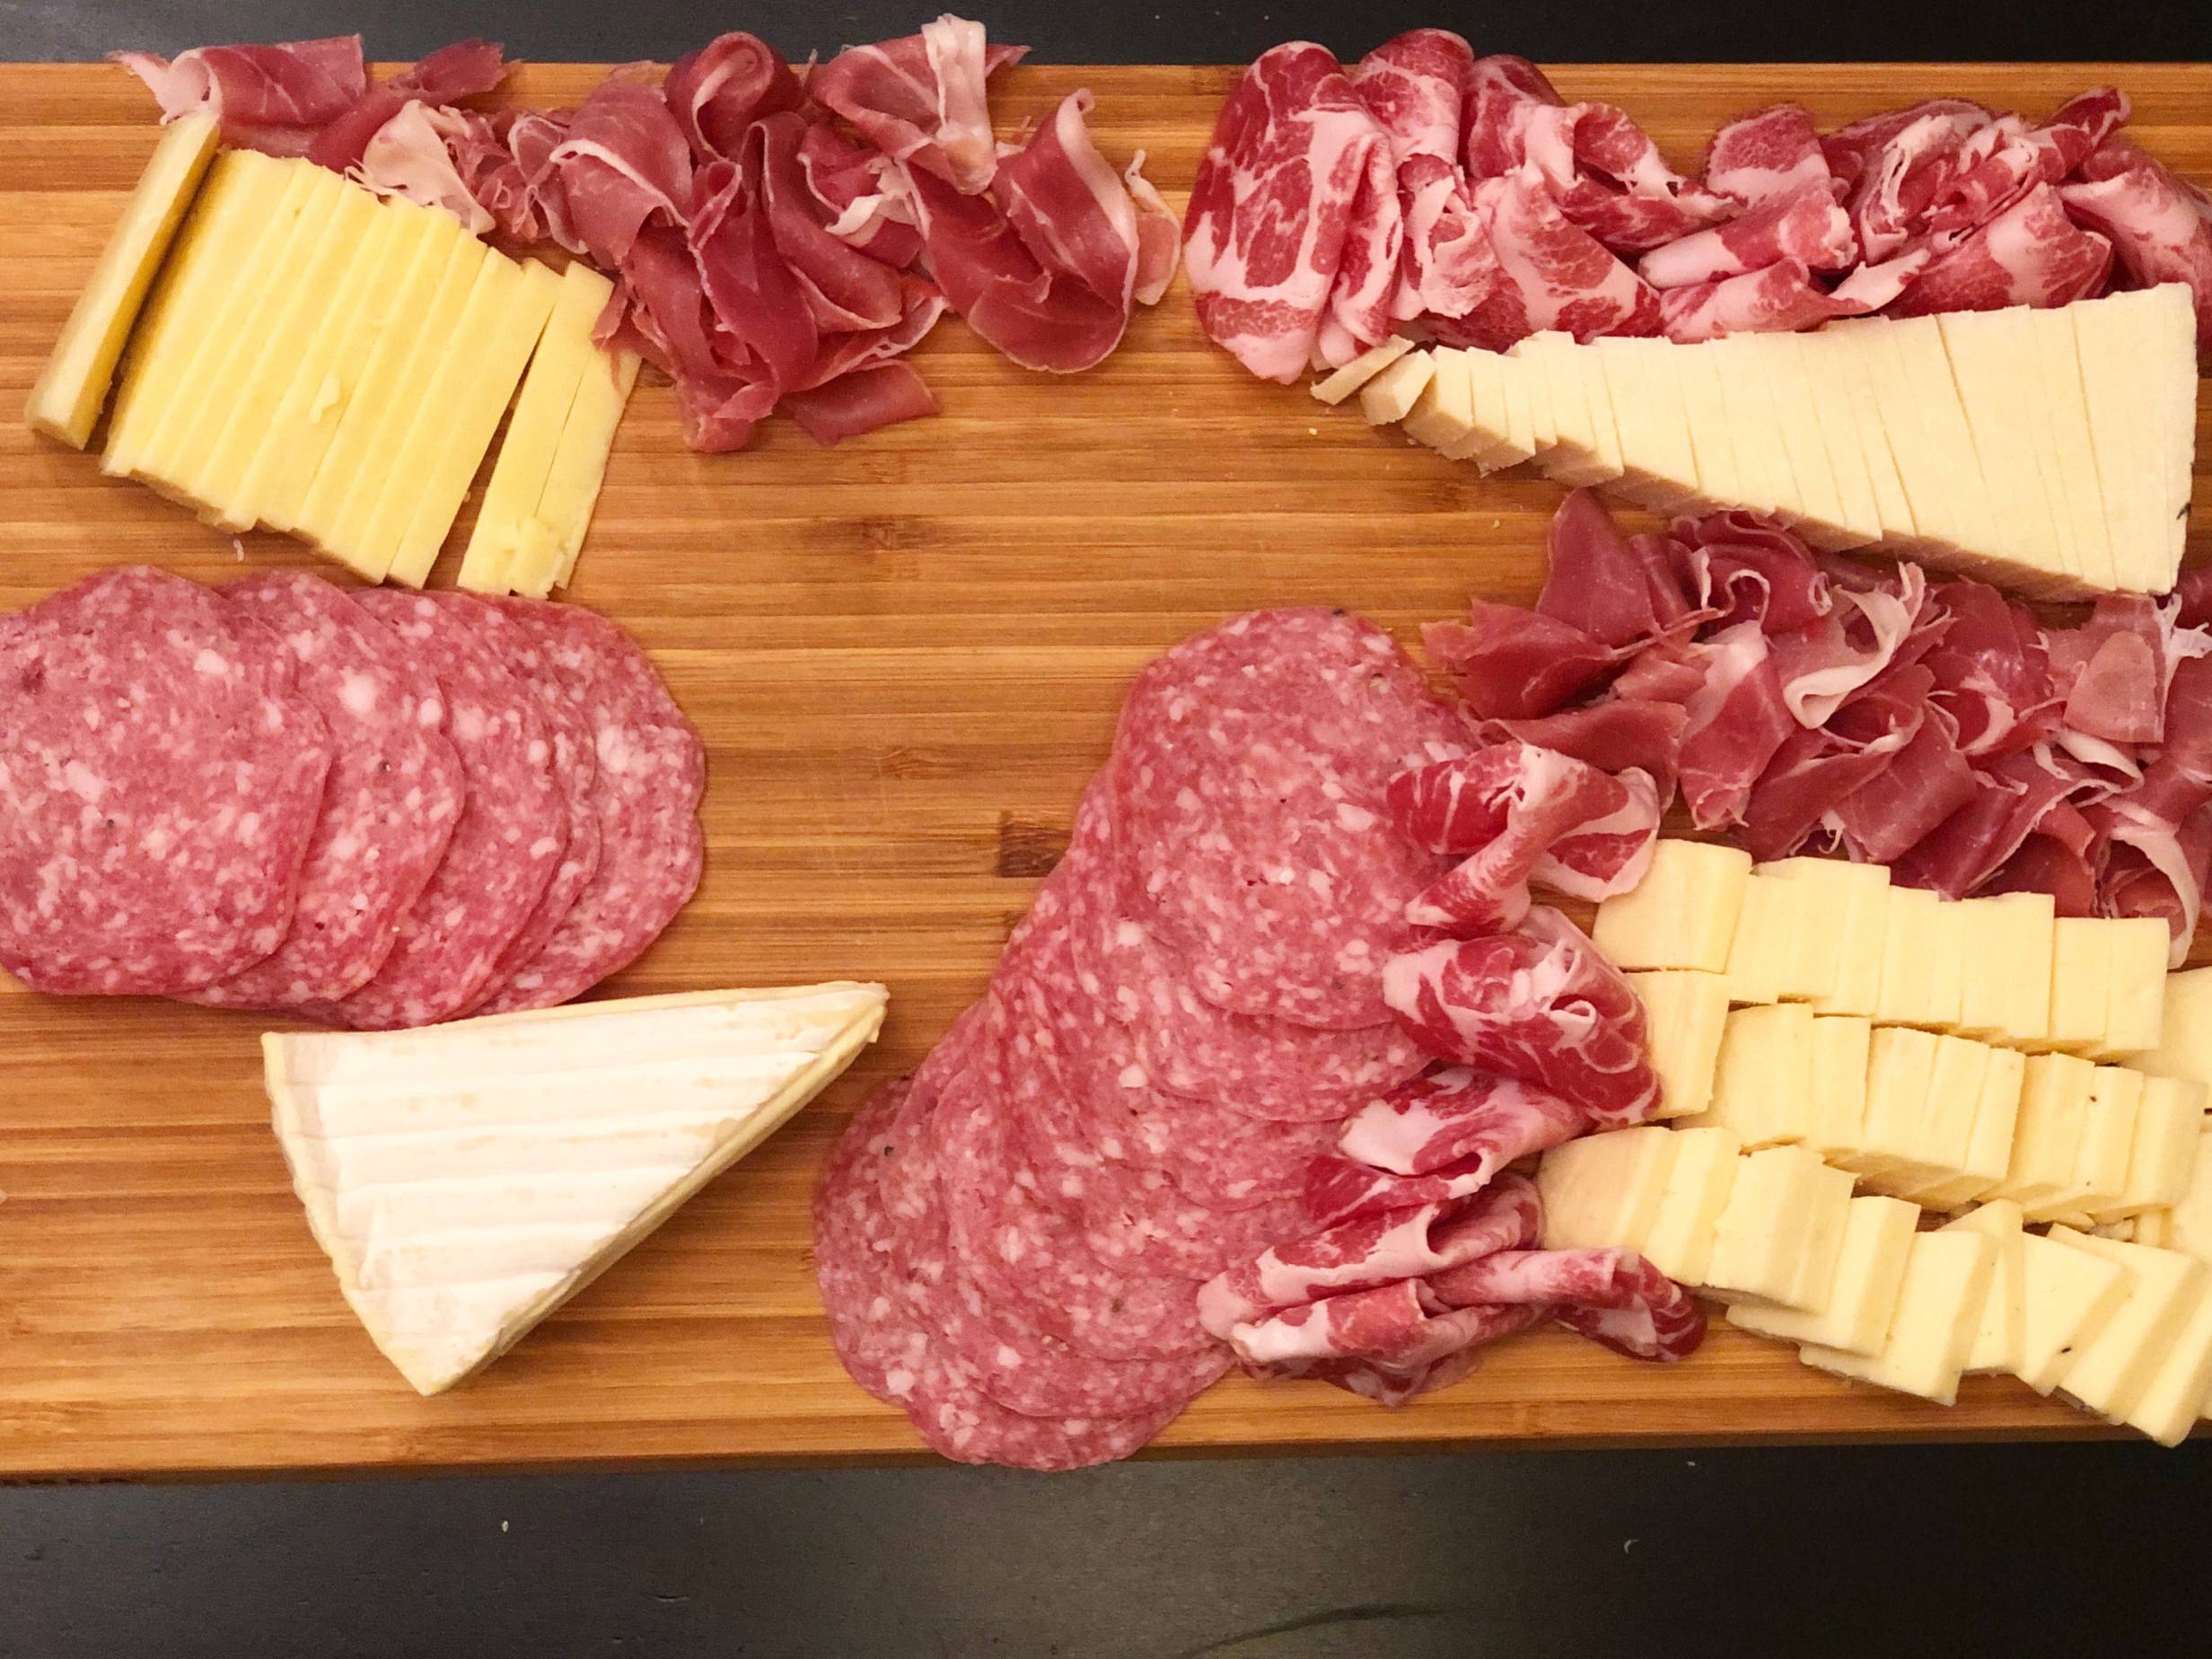 A wooden cutting board with sliced cheese and red meats spread across the board with space left open. Photo by Alyssa Buckley.